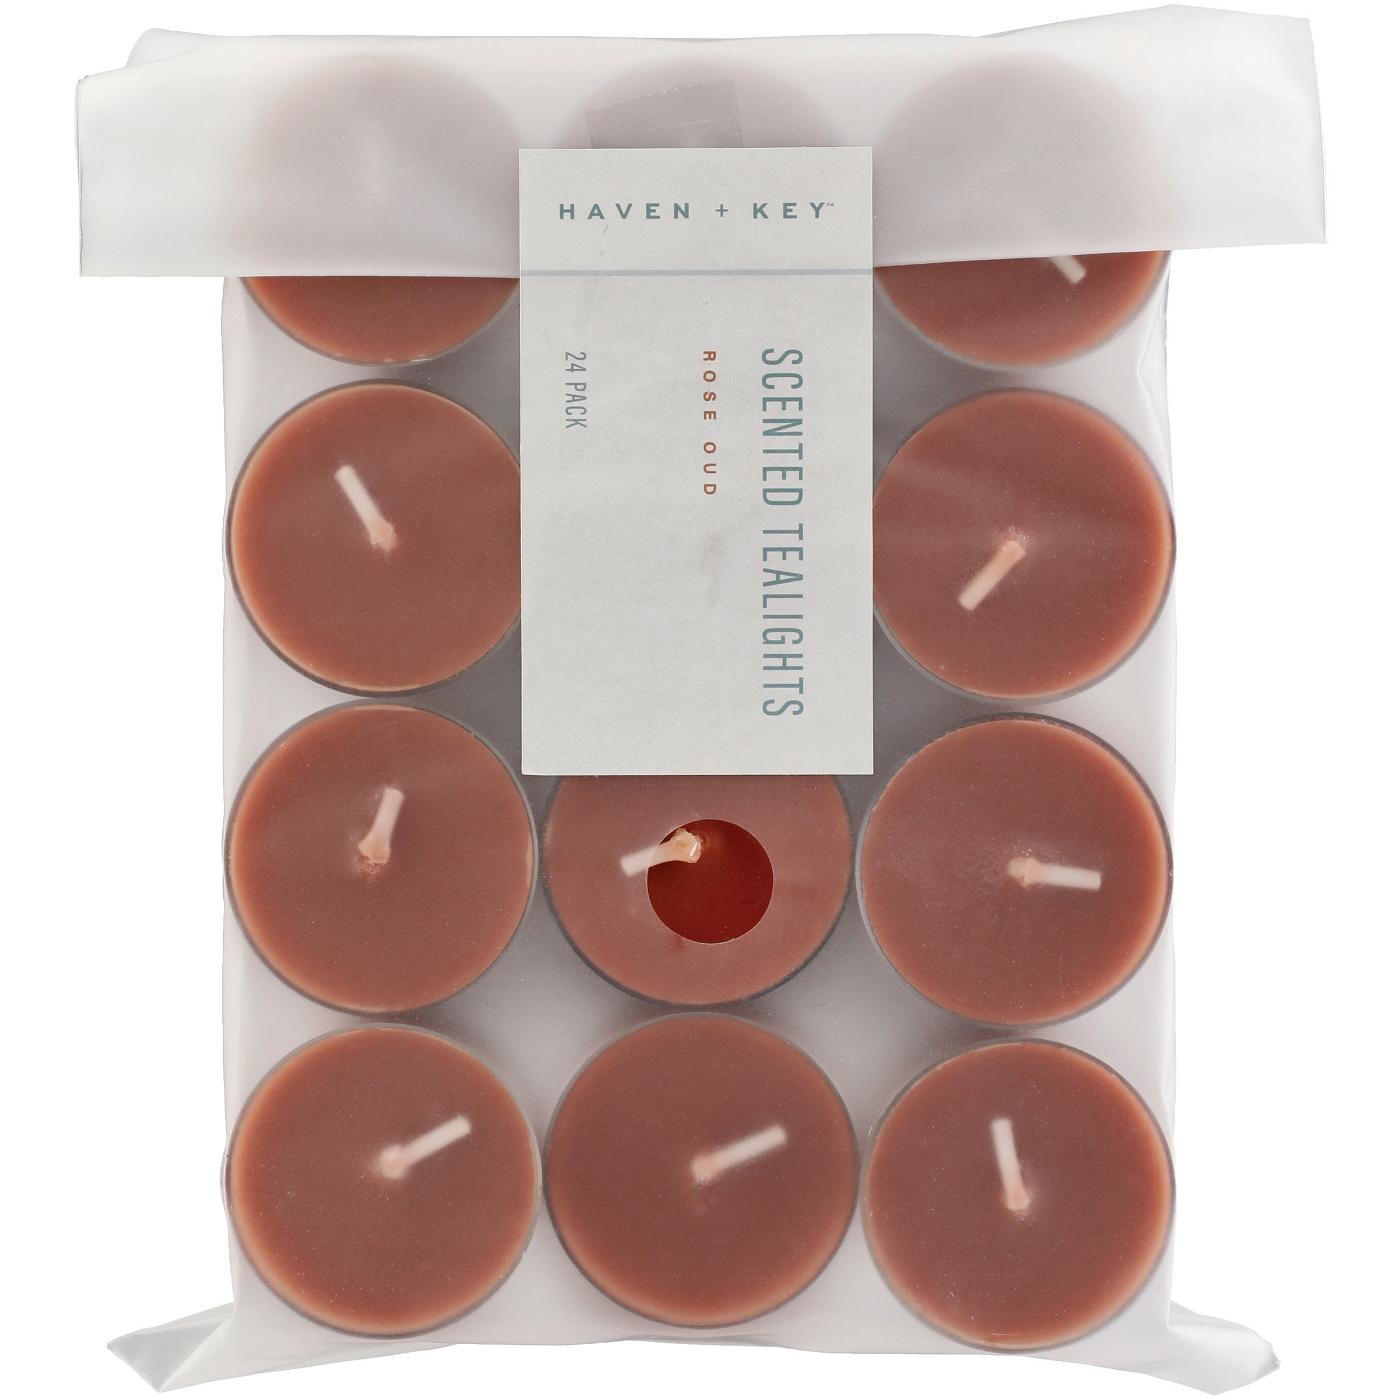 Haven + Key Rose Oud Scented Tealights; image 1 of 2